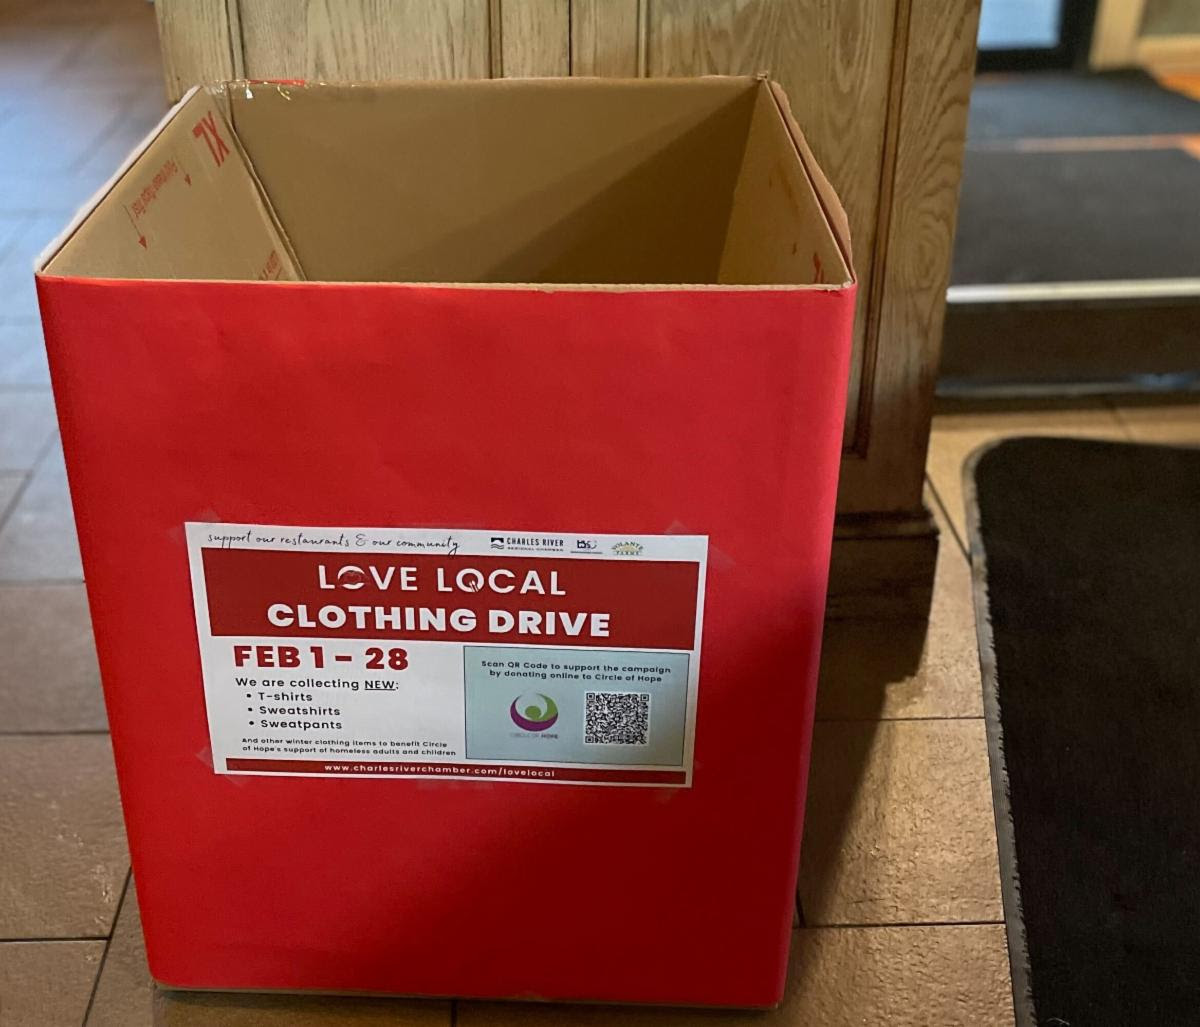 Give Local Clothing Drive